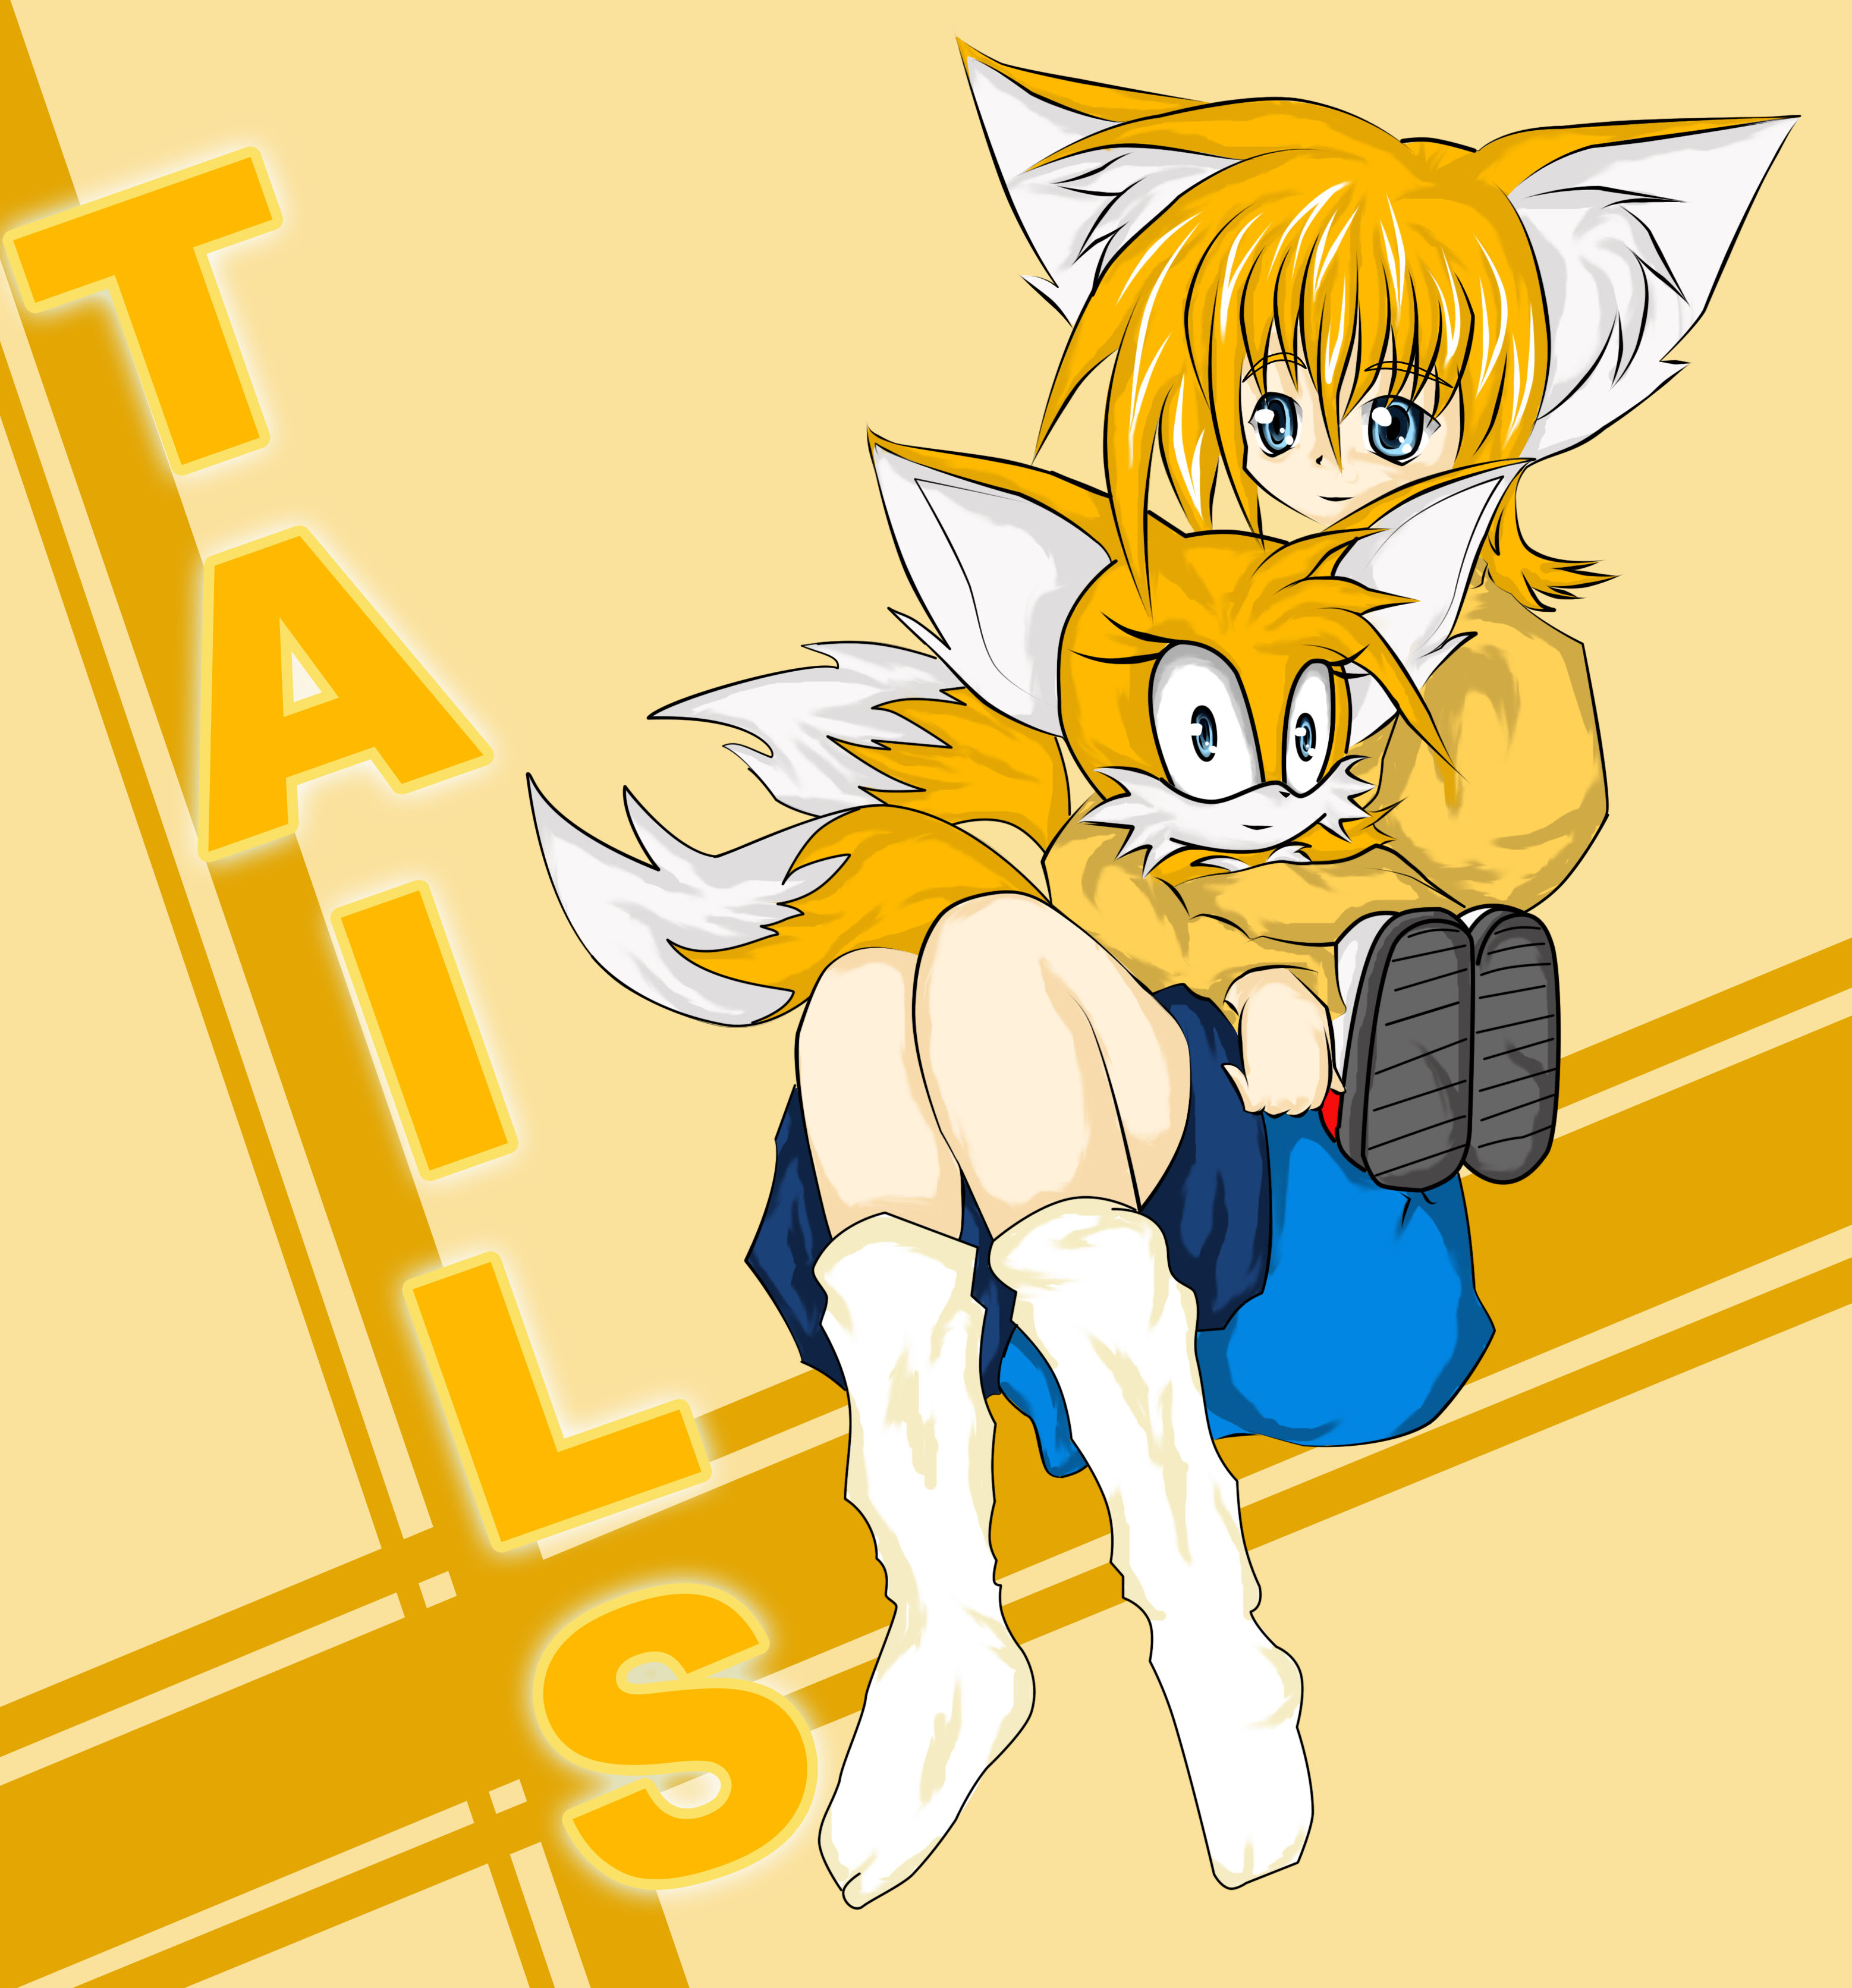 "Sonic" and "Tails" lead to some DeviantArt images whic...